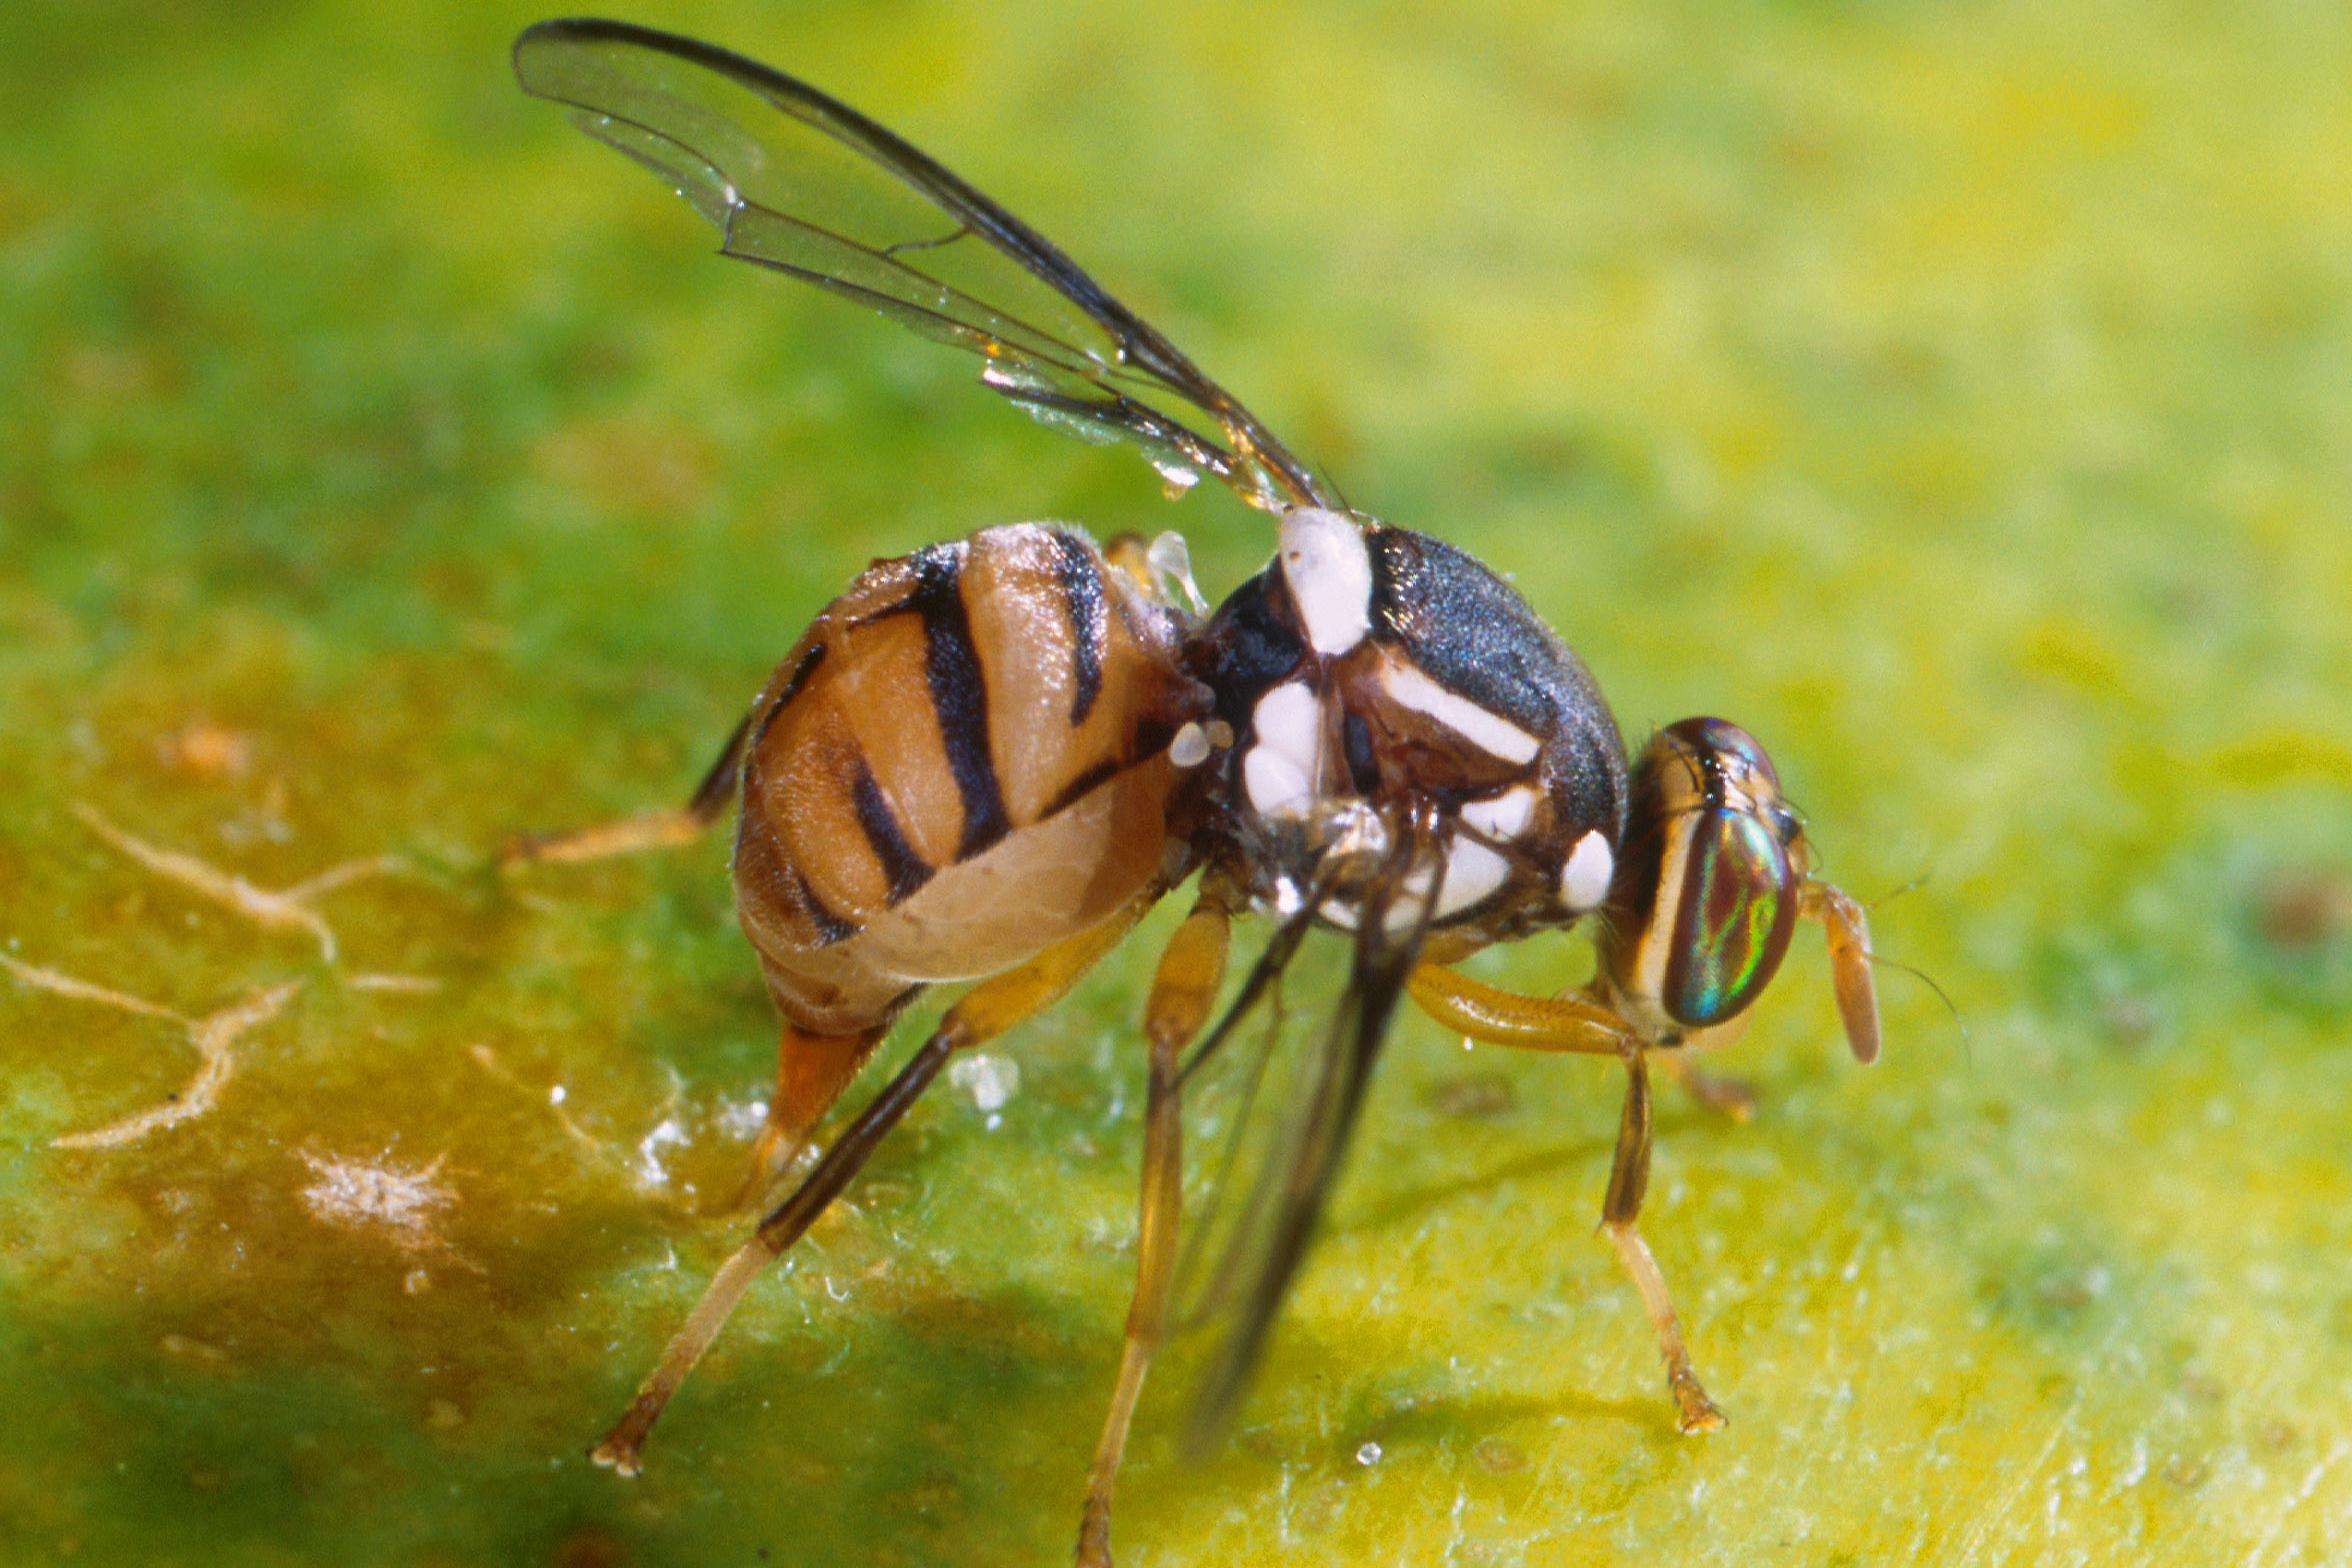 Fruit fly with white spots on a dark-brown thorax and a tan abdomen with dark-brown to black markings.